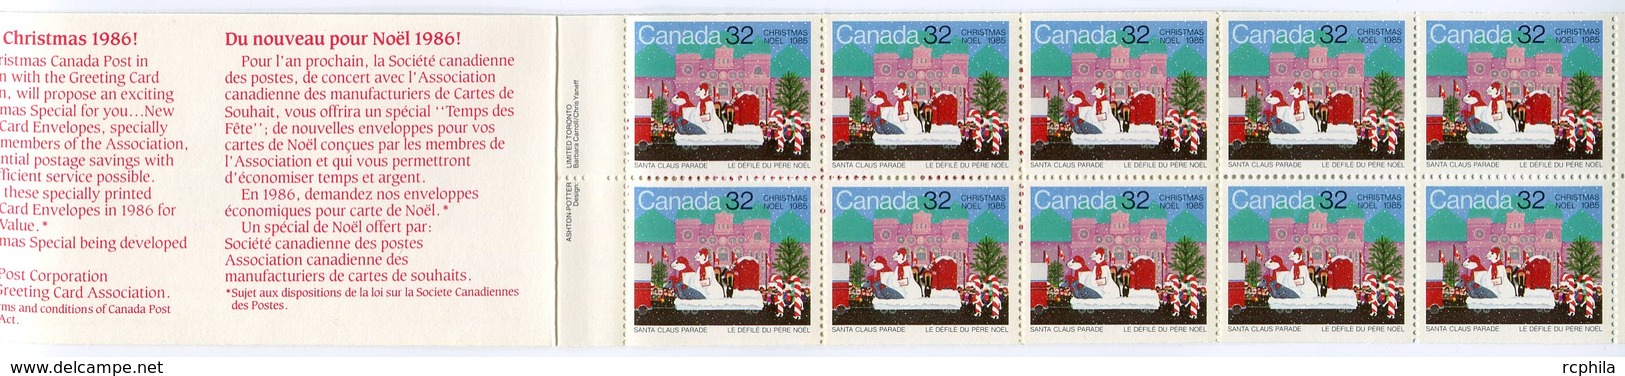 RC 16022 CANADA BK88 CHRISTMAS 1985 CARNET COMPLET BOOKLET MNH NEUF ** - Full Booklets